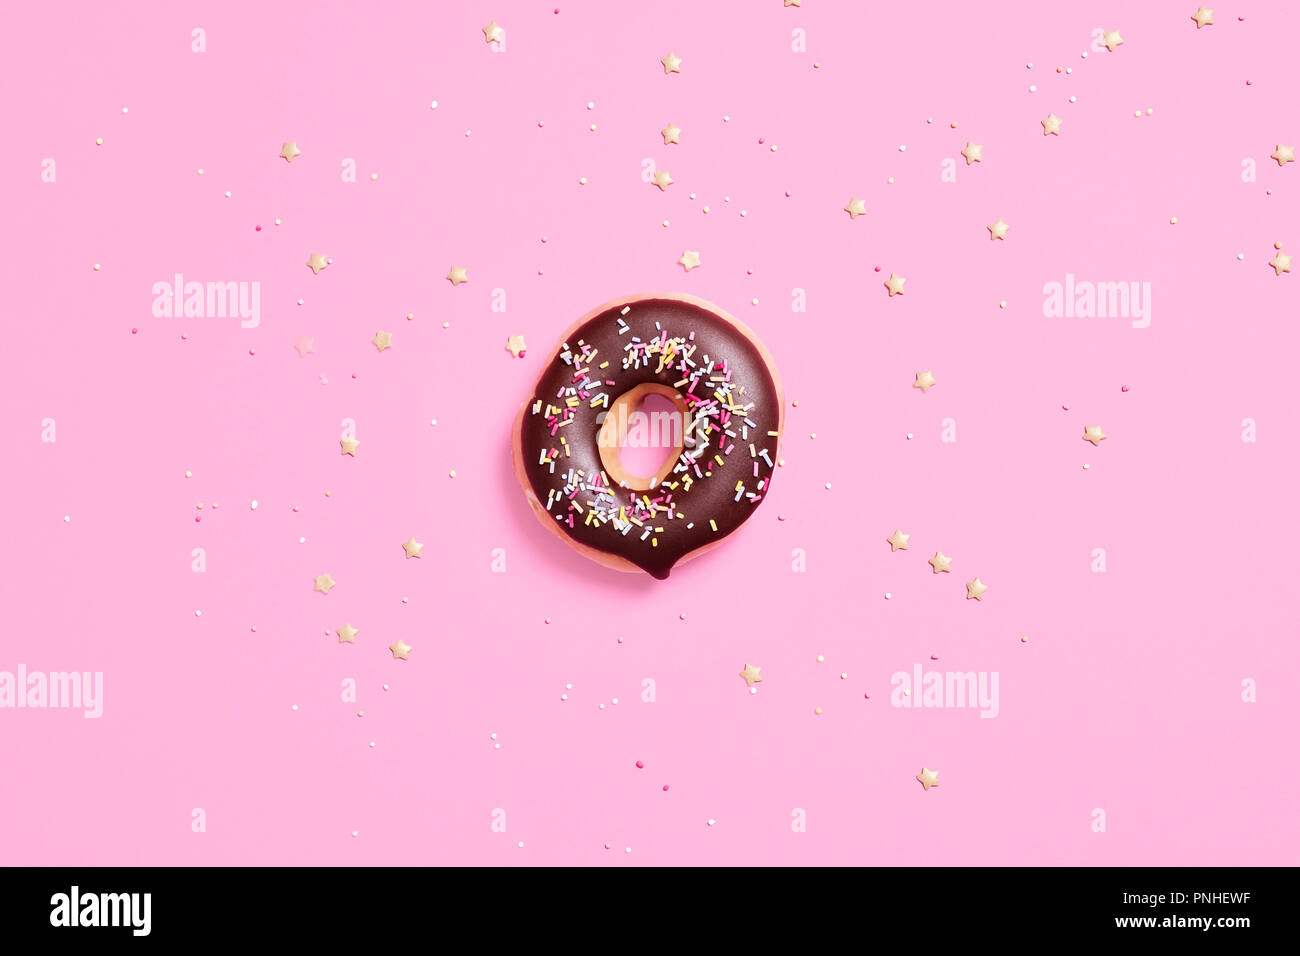 Classic ring donuts with chocolate frosting and sprinkles on a pastel pink background with a center composition and sprinkles scattered around. Stock Photo